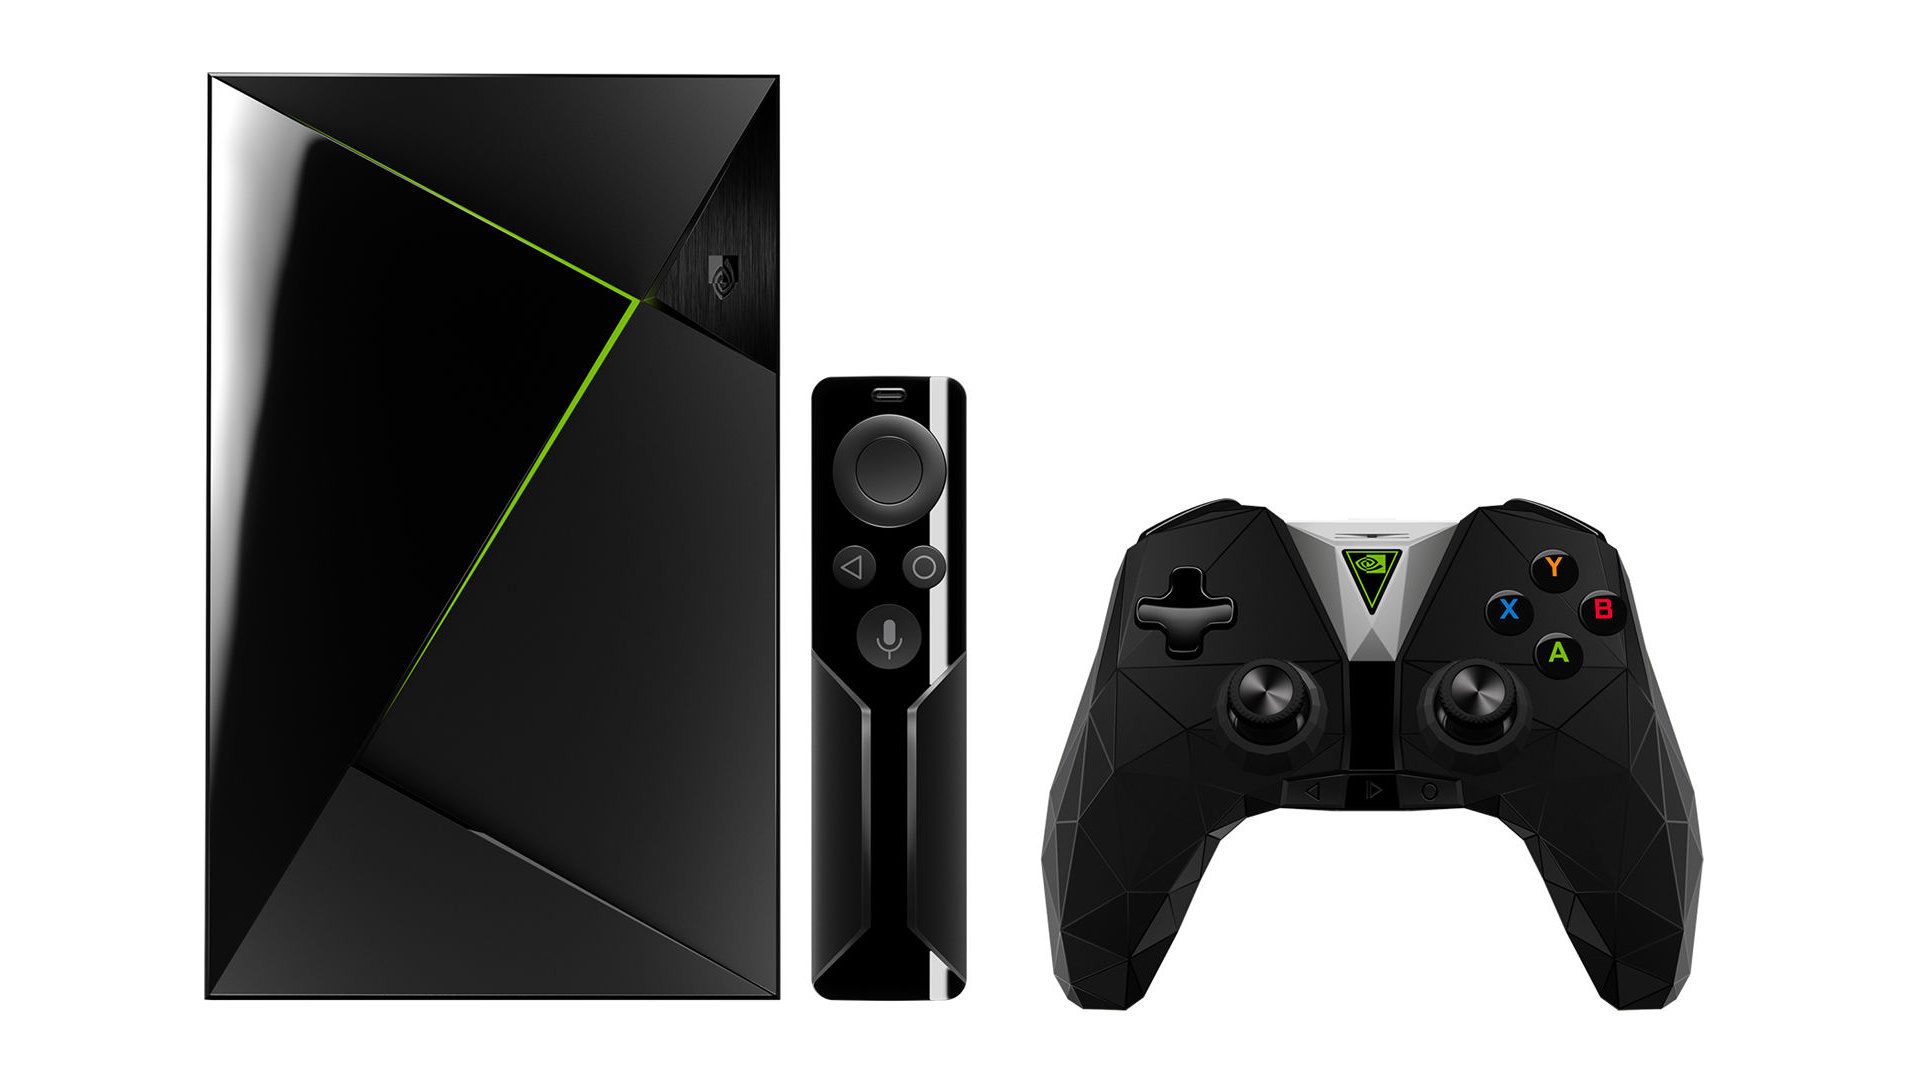 NVIDIA Shield TV Review: Powerful Streaming Box for Gamers